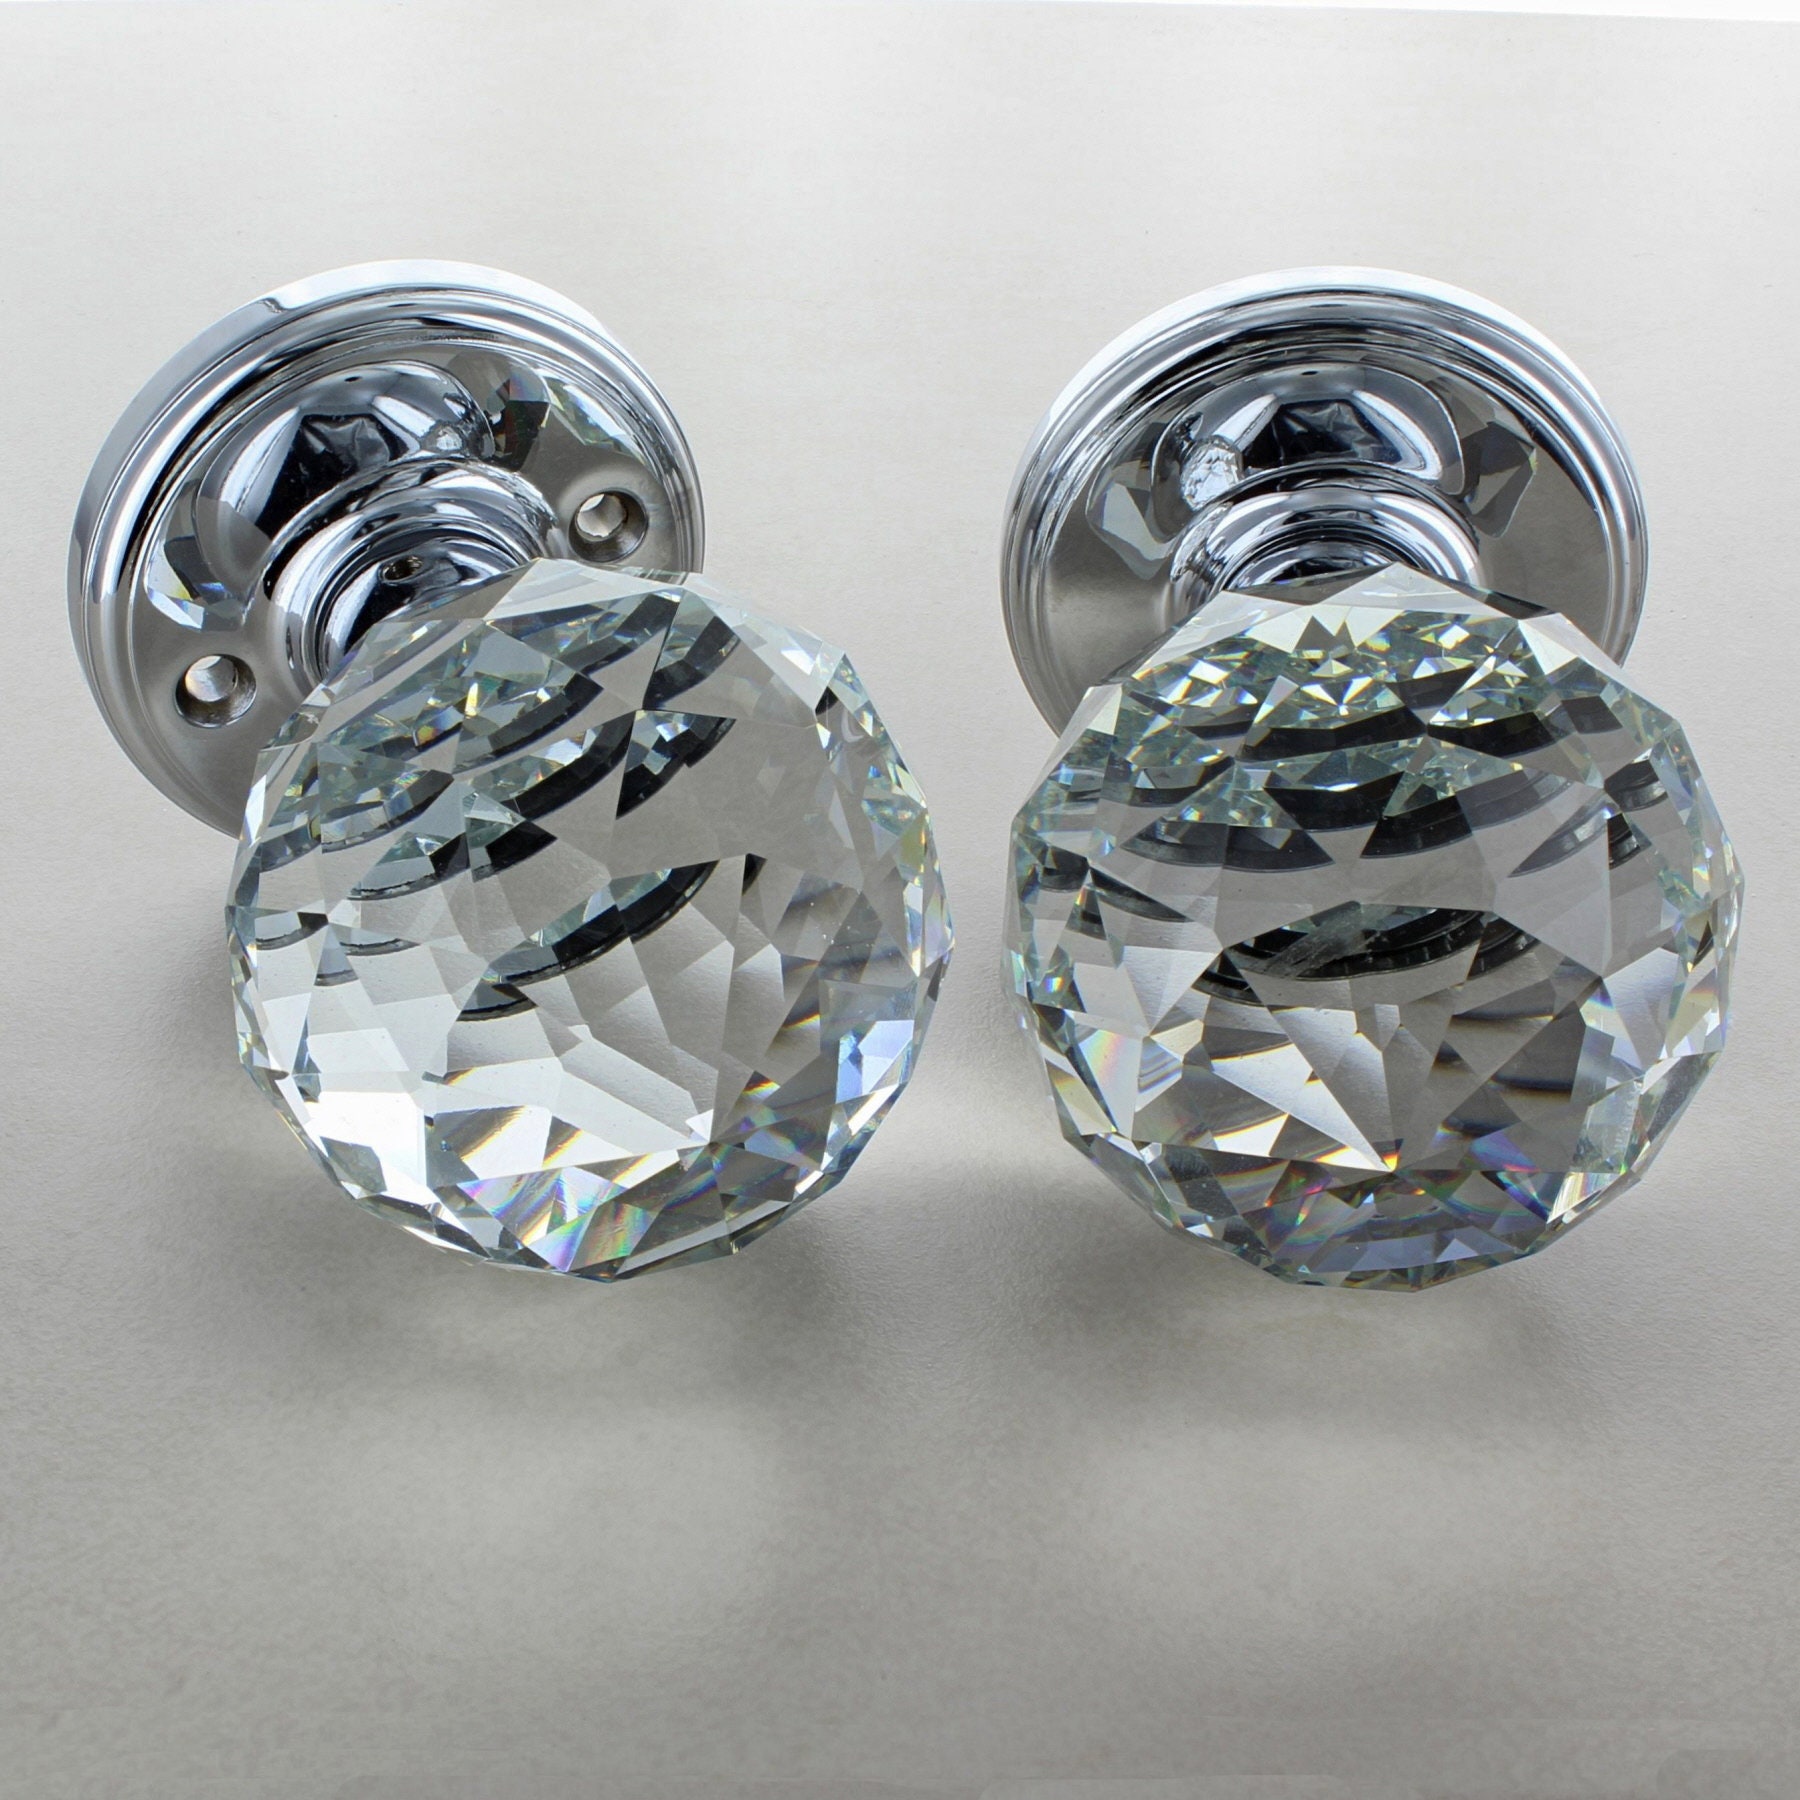 Pair of Solid Round Crystal Cut Faceted Clear Glass Mortice Door Knobs Chrome 